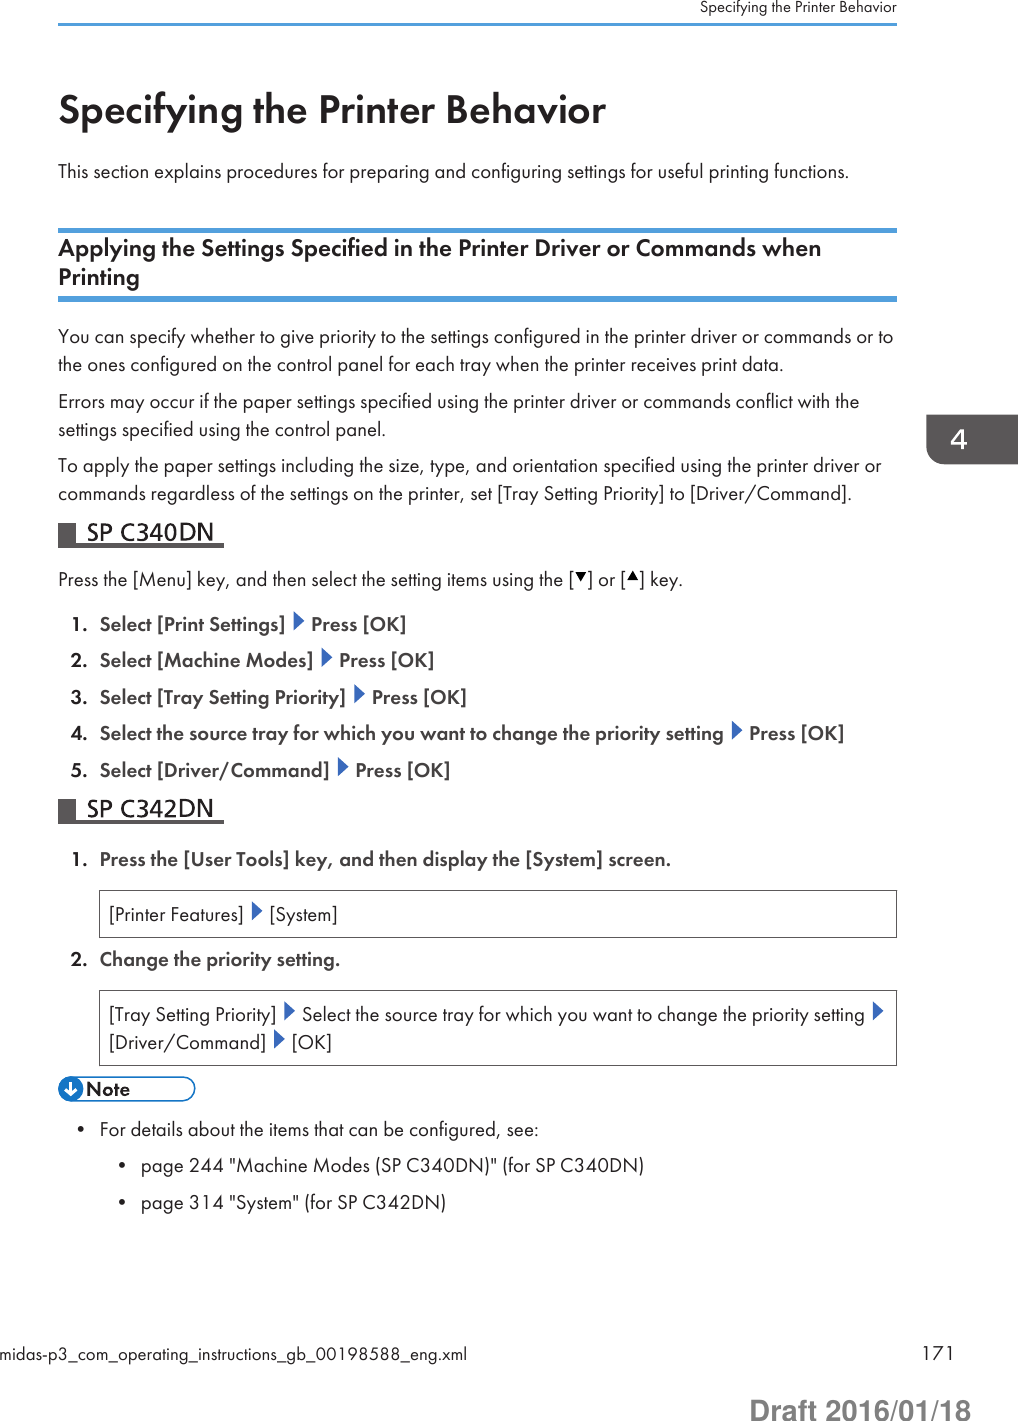 Specifying the Printer BehaviorThis section explains procedures for preparing and configuring settings for useful printing functions.Applying the Settings Specified in the Printer Driver or Commands whenPrintingYou can specify whether to give priority to the settings configured in the printer driver or commands or tothe ones configured on the control panel for each tray when the printer receives print data.Errors may occur if the paper settings specified using the printer driver or commands conflict with thesettings specified using the control panel.To apply the paper settings including the size, type, and orientation specified using the printer driver orcommands regardless of the settings on the printer, set [Tray Setting Priority] to [Driver/Command].Press the [Menu] key, and then select the setting items using the [ ] or [ ] key.1. Select [Print Settings]   Press [OK]2. Select [Machine Modes]   Press [OK]3. Select [Tray Setting Priority]   Press [OK]4. Select the source tray for which you want to change the priority setting   Press [OK]5. Select [Driver/Command]   Press [OK]1. Press the [User Tools] key, and then display the [System] screen.[Printer Features]   [System]2. Change the priority setting.[Tray Setting Priority]   Select the source tray for which you want to change the priority setting [Driver/Command]   [OK]• For details about the items that can be configured, see:• page 244 &quot;Machine Modes (SP C340DN)&quot; (for SP C340DN)• page 314 &quot;System&quot; (for SP C342DN)Specifying the Printer Behaviormidas-p3_com_operating_instructions_gb_00198588_eng.xml 171Draft 2016/01/18